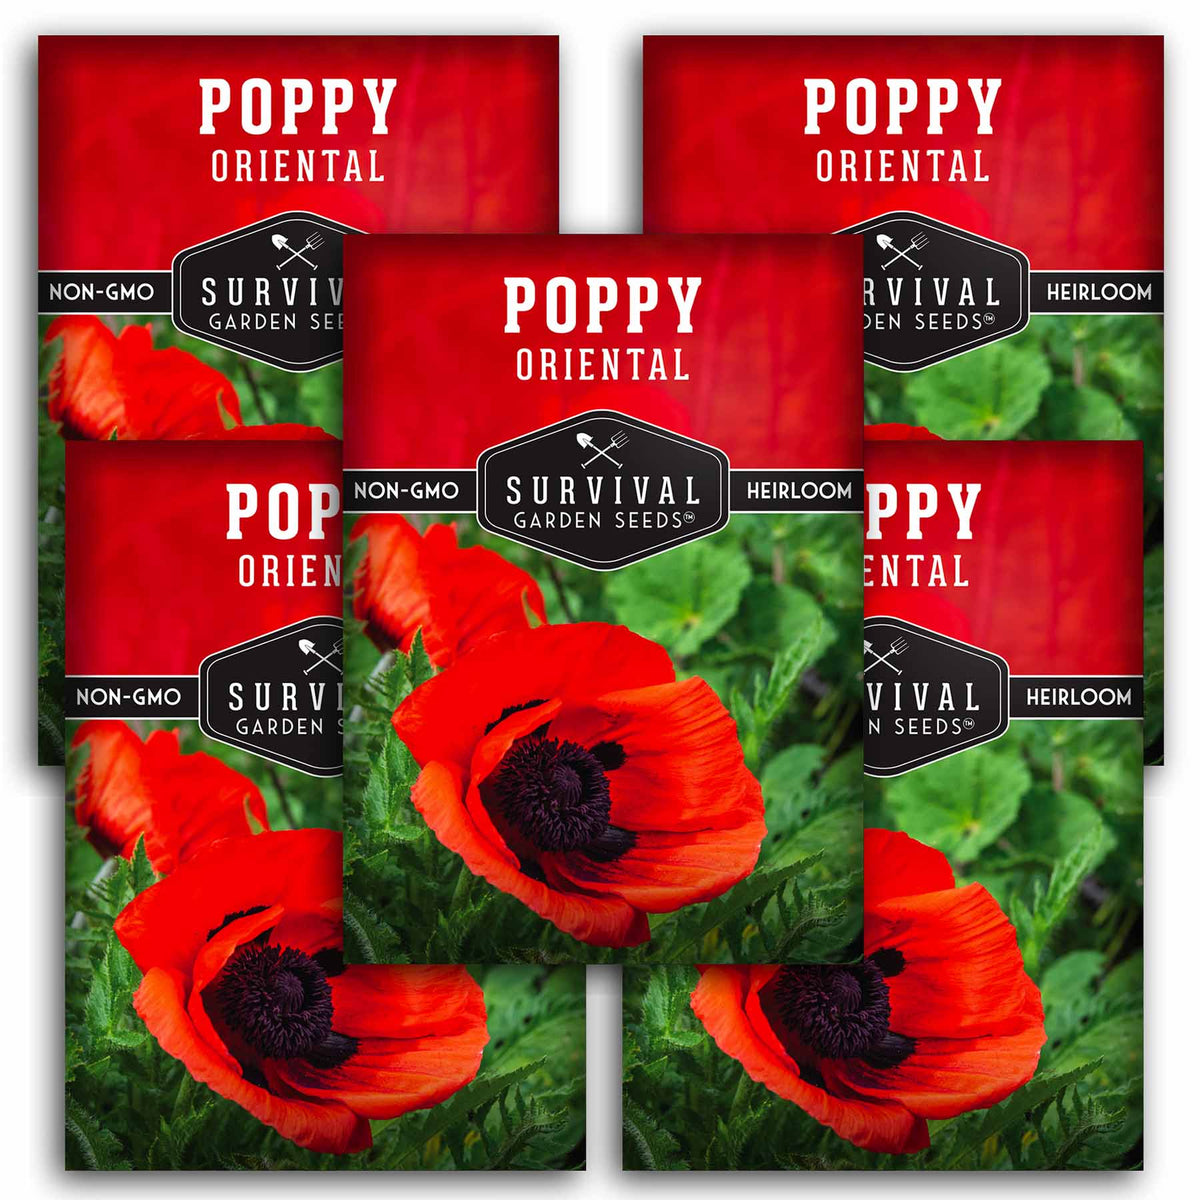 5 packets of Orient Poppy seeds